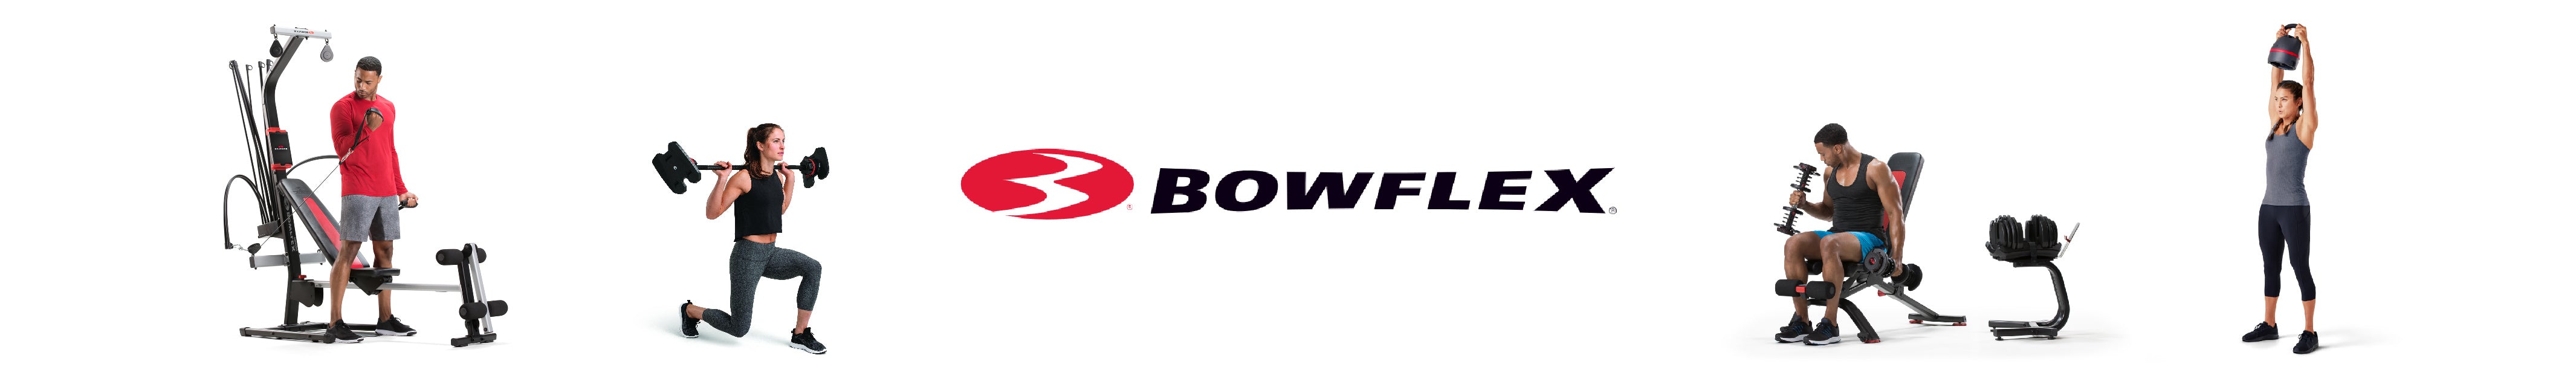 Bowflex Strength Products Flaman Fitness